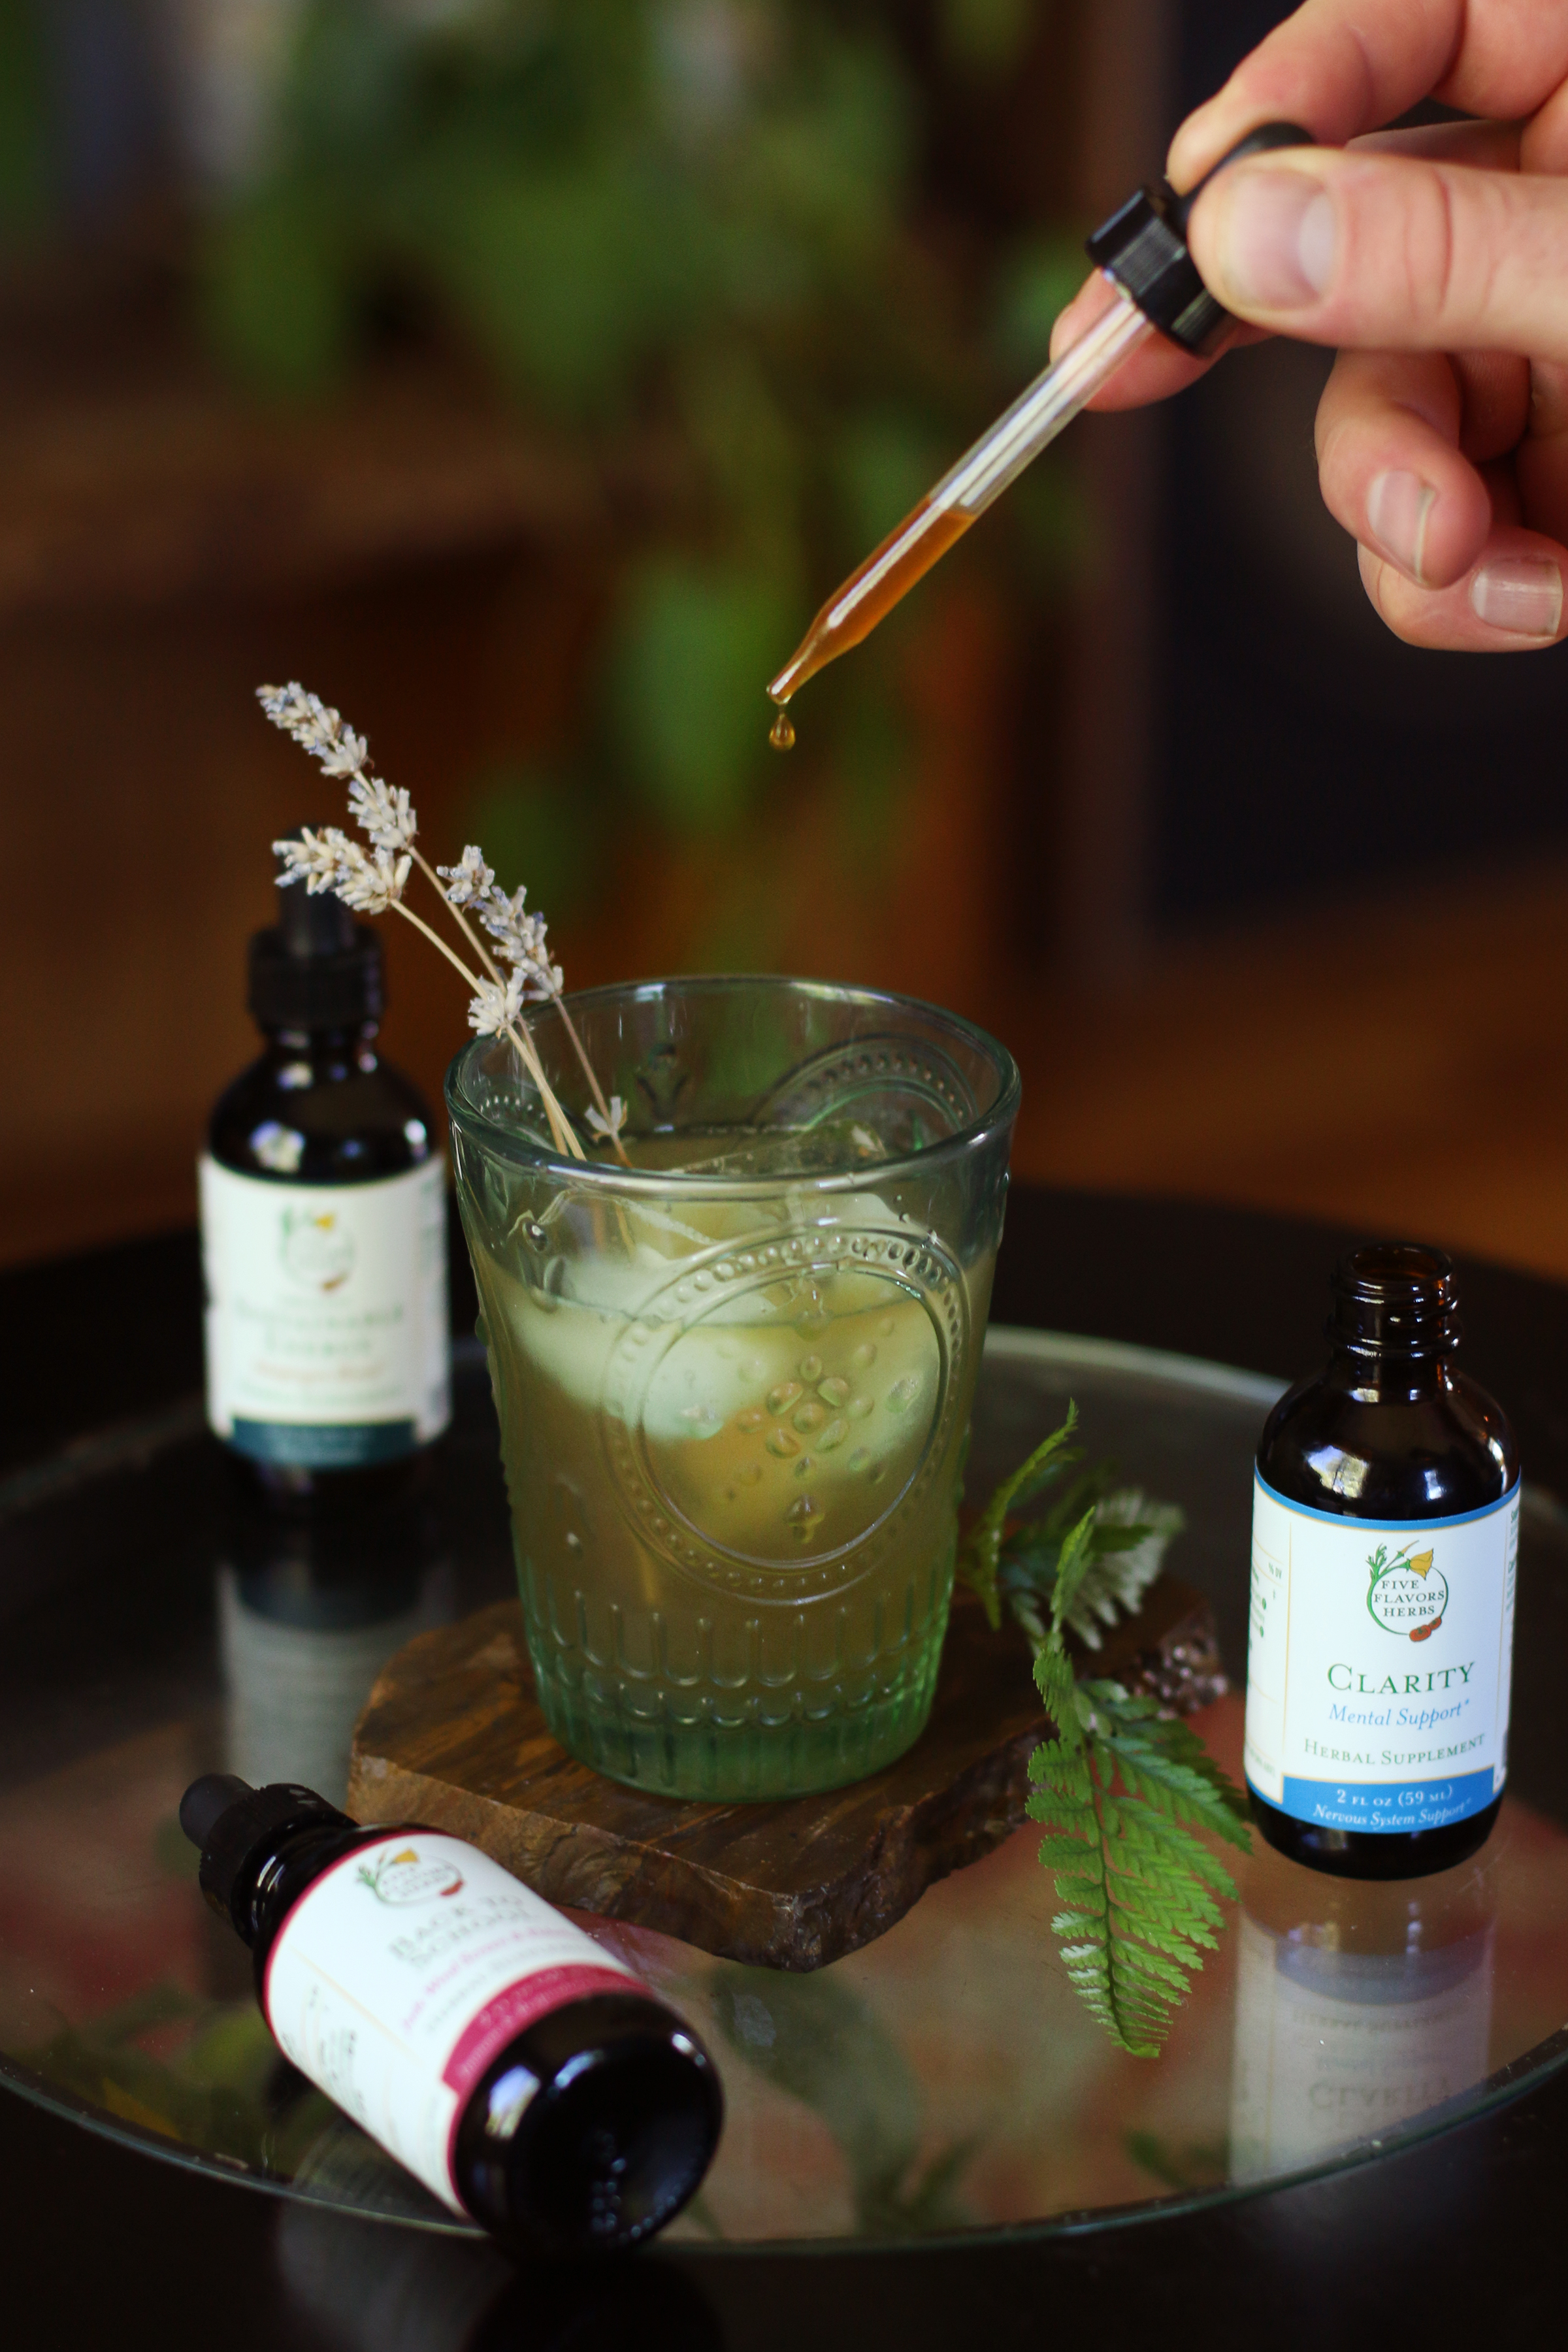 hand-dropping-amber-colored-liquid-tincture-into-vintage-green-glass-surrounded-by-sprigs-of-herbs-and-plants-and-glass-bottles-of-herbal-tincture-blends